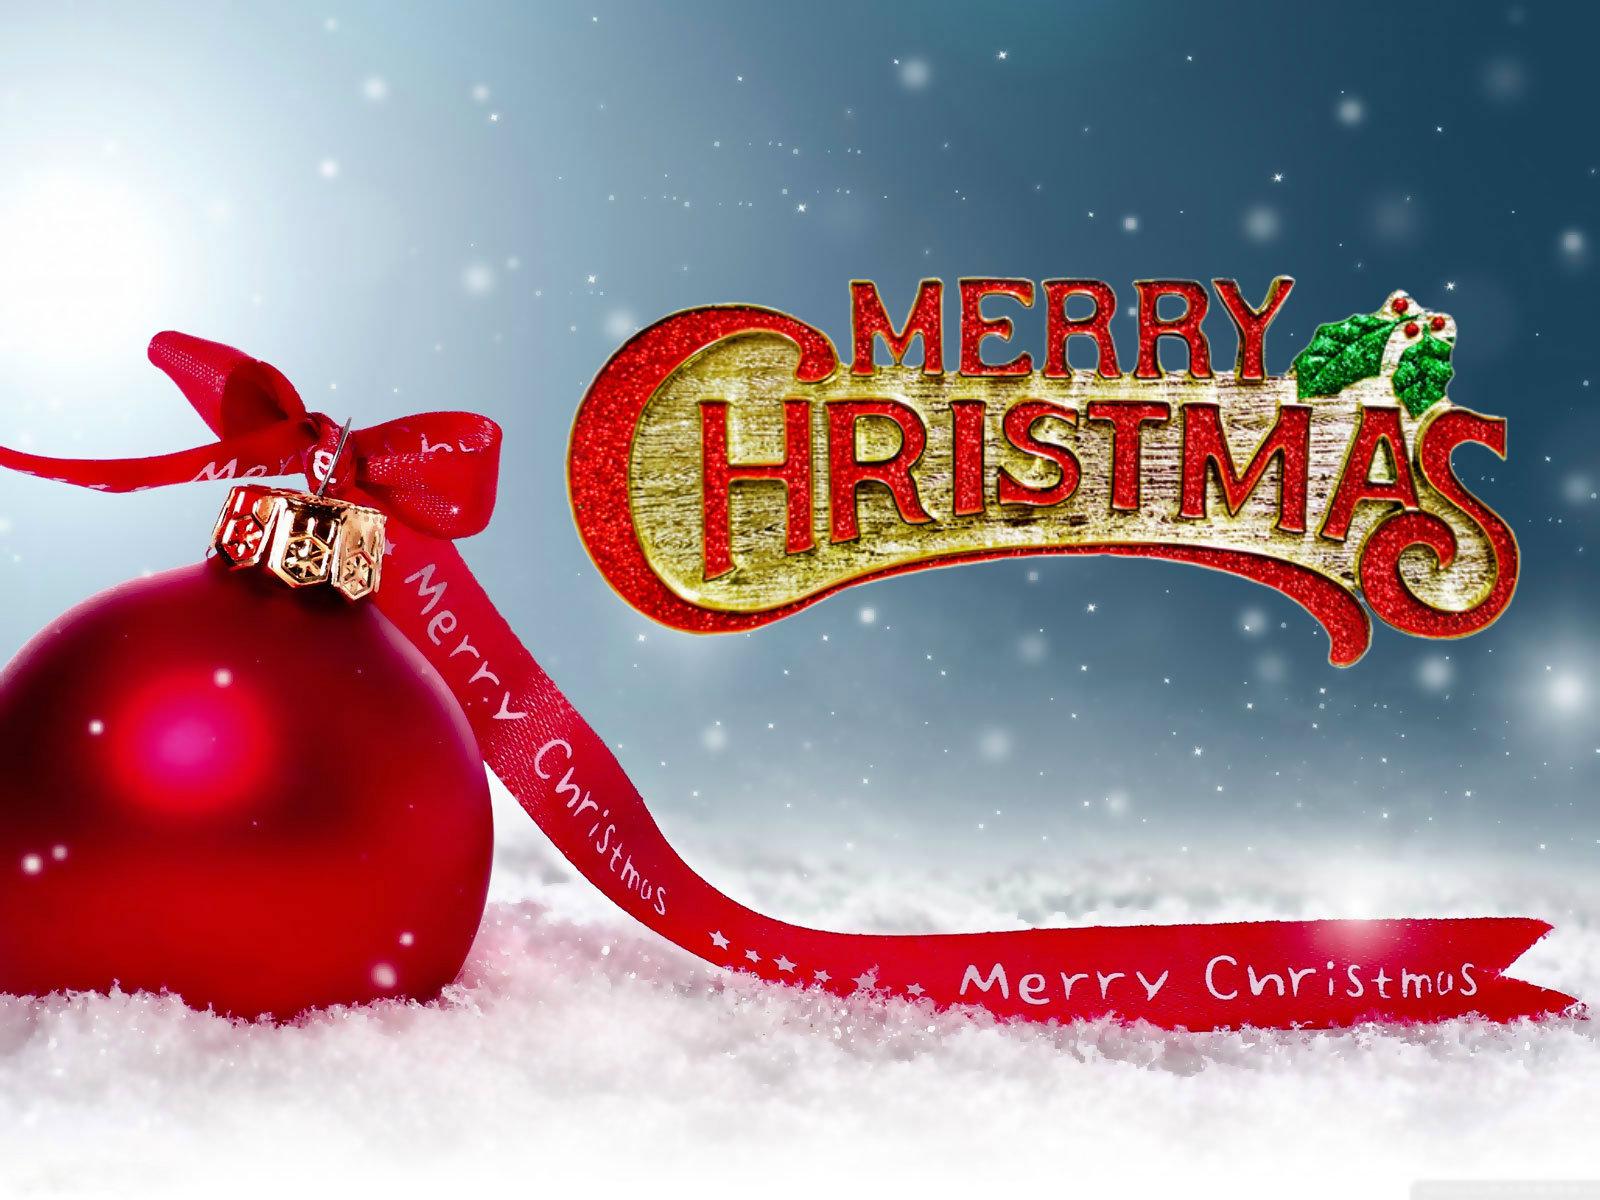 Merry Christmas Images Hd 2021 Holidays Happy Wishes Greetings